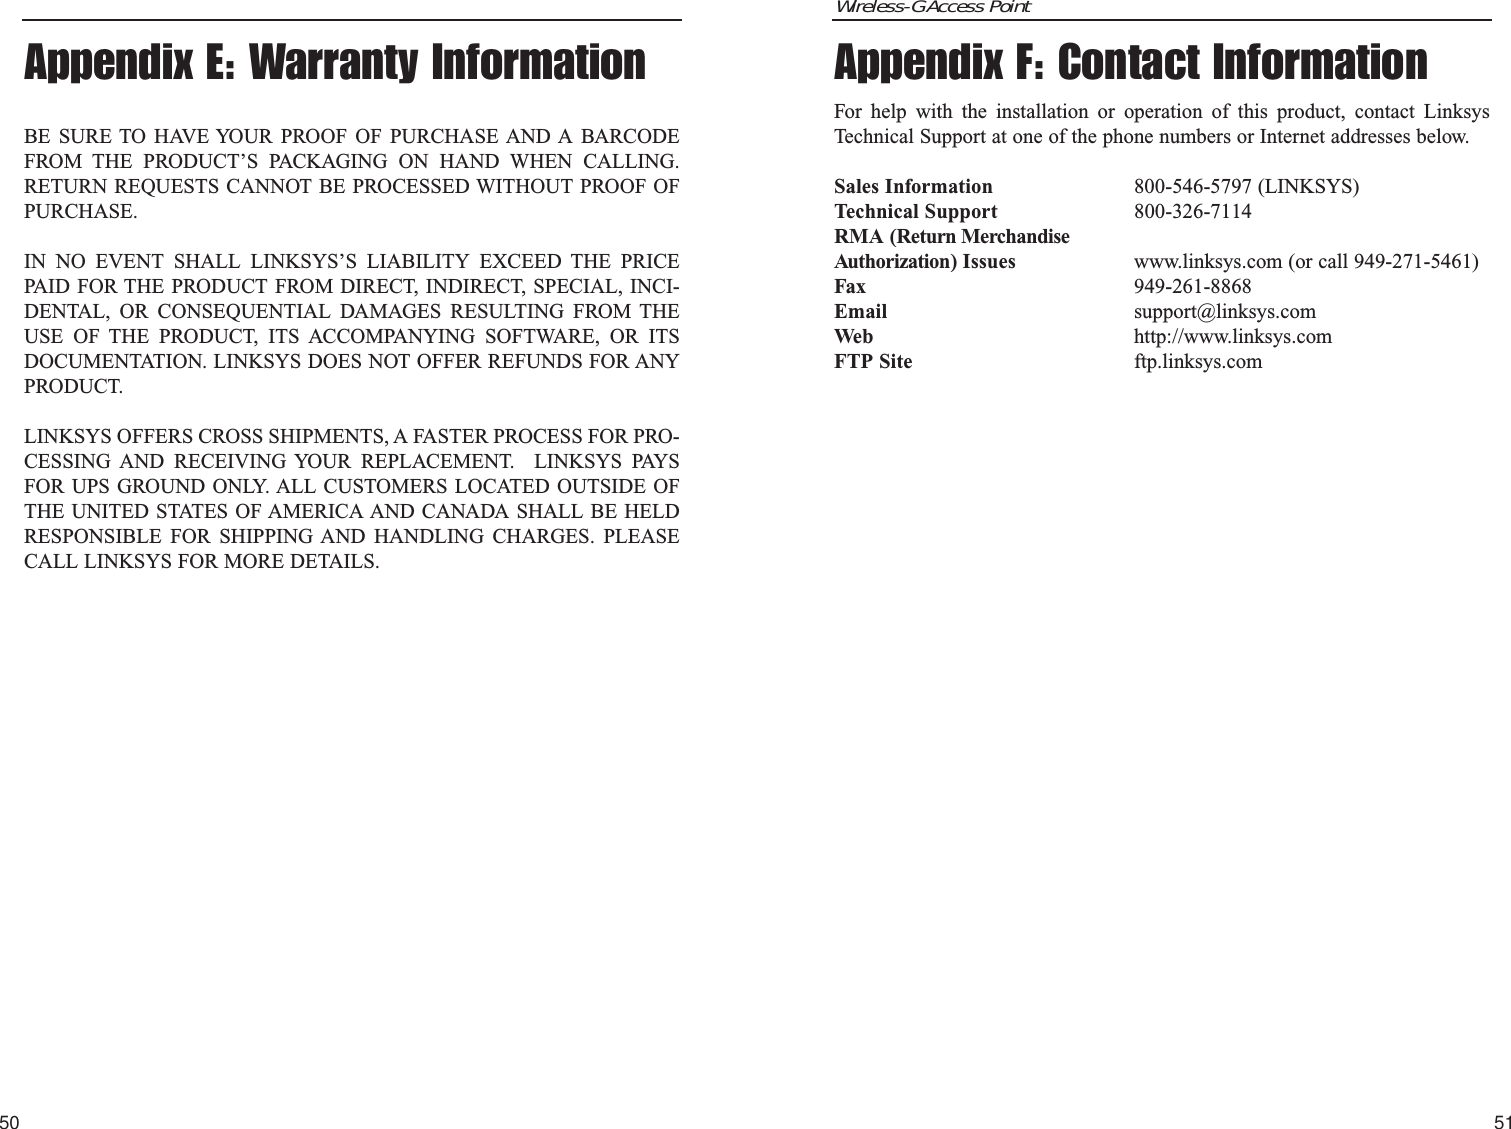 Wireless-G Access Point5150Appendix F: Contact InformationFor help with the installation or operation of this product, contact LinksysTechnical Support at one of the phone numbers or Internet addresses below.Sales Information 800-546-5797 (LINKSYS)Technical Support 800-326-7114RMA (Return MerchandiseAuthorization) Issues www.linksys.com (or call 949-271-5461)Fax 949-261-8868Email support@linksys.comWeb http://www.linksys.comFTP Site ftp.linksys.comAppendix E: Warranty InformationBE SURE TO HAVE YOUR PROOF OF PURCHASE AND A BARCODEFROM THE PRODUCT’S PACKAGING ON HAND WHEN CALLING.RETURN REQUESTS CANNOT BE PROCESSED WITHOUT PROOF OFPURCHASE. IN NO EVENT SHALL LINKSYS’S LIABILITY EXCEED THE PRICEPAID FOR THE PRODUCT FROM DIRECT, INDIRECT, SPECIAL, INCI-DENTAL, OR CONSEQUENTIAL DAMAGES RESULTING FROM THEUSE OF THE PRODUCT, ITS ACCOMPANYING SOFTWARE, OR ITSDOCUMENTATION. LINKSYS DOES NOT OFFER REFUNDS FOR ANYPRODUCT. LINKSYS OFFERS CROSS SHIPMENTS, A FASTER PROCESS FOR PRO-CESSING AND RECEIVING YOUR REPLACEMENT.  LINKSYS PAYSFOR UPS GROUND ONLY. ALL CUSTOMERS LOCATED OUTSIDE OFTHE UNITED STATES OF AMERICA AND CANADA SHALL BE HELDRESPONSIBLE FOR SHIPPING AND HANDLING CHARGES. PLEASECALL LINKSYS FOR MORE DETAILS.